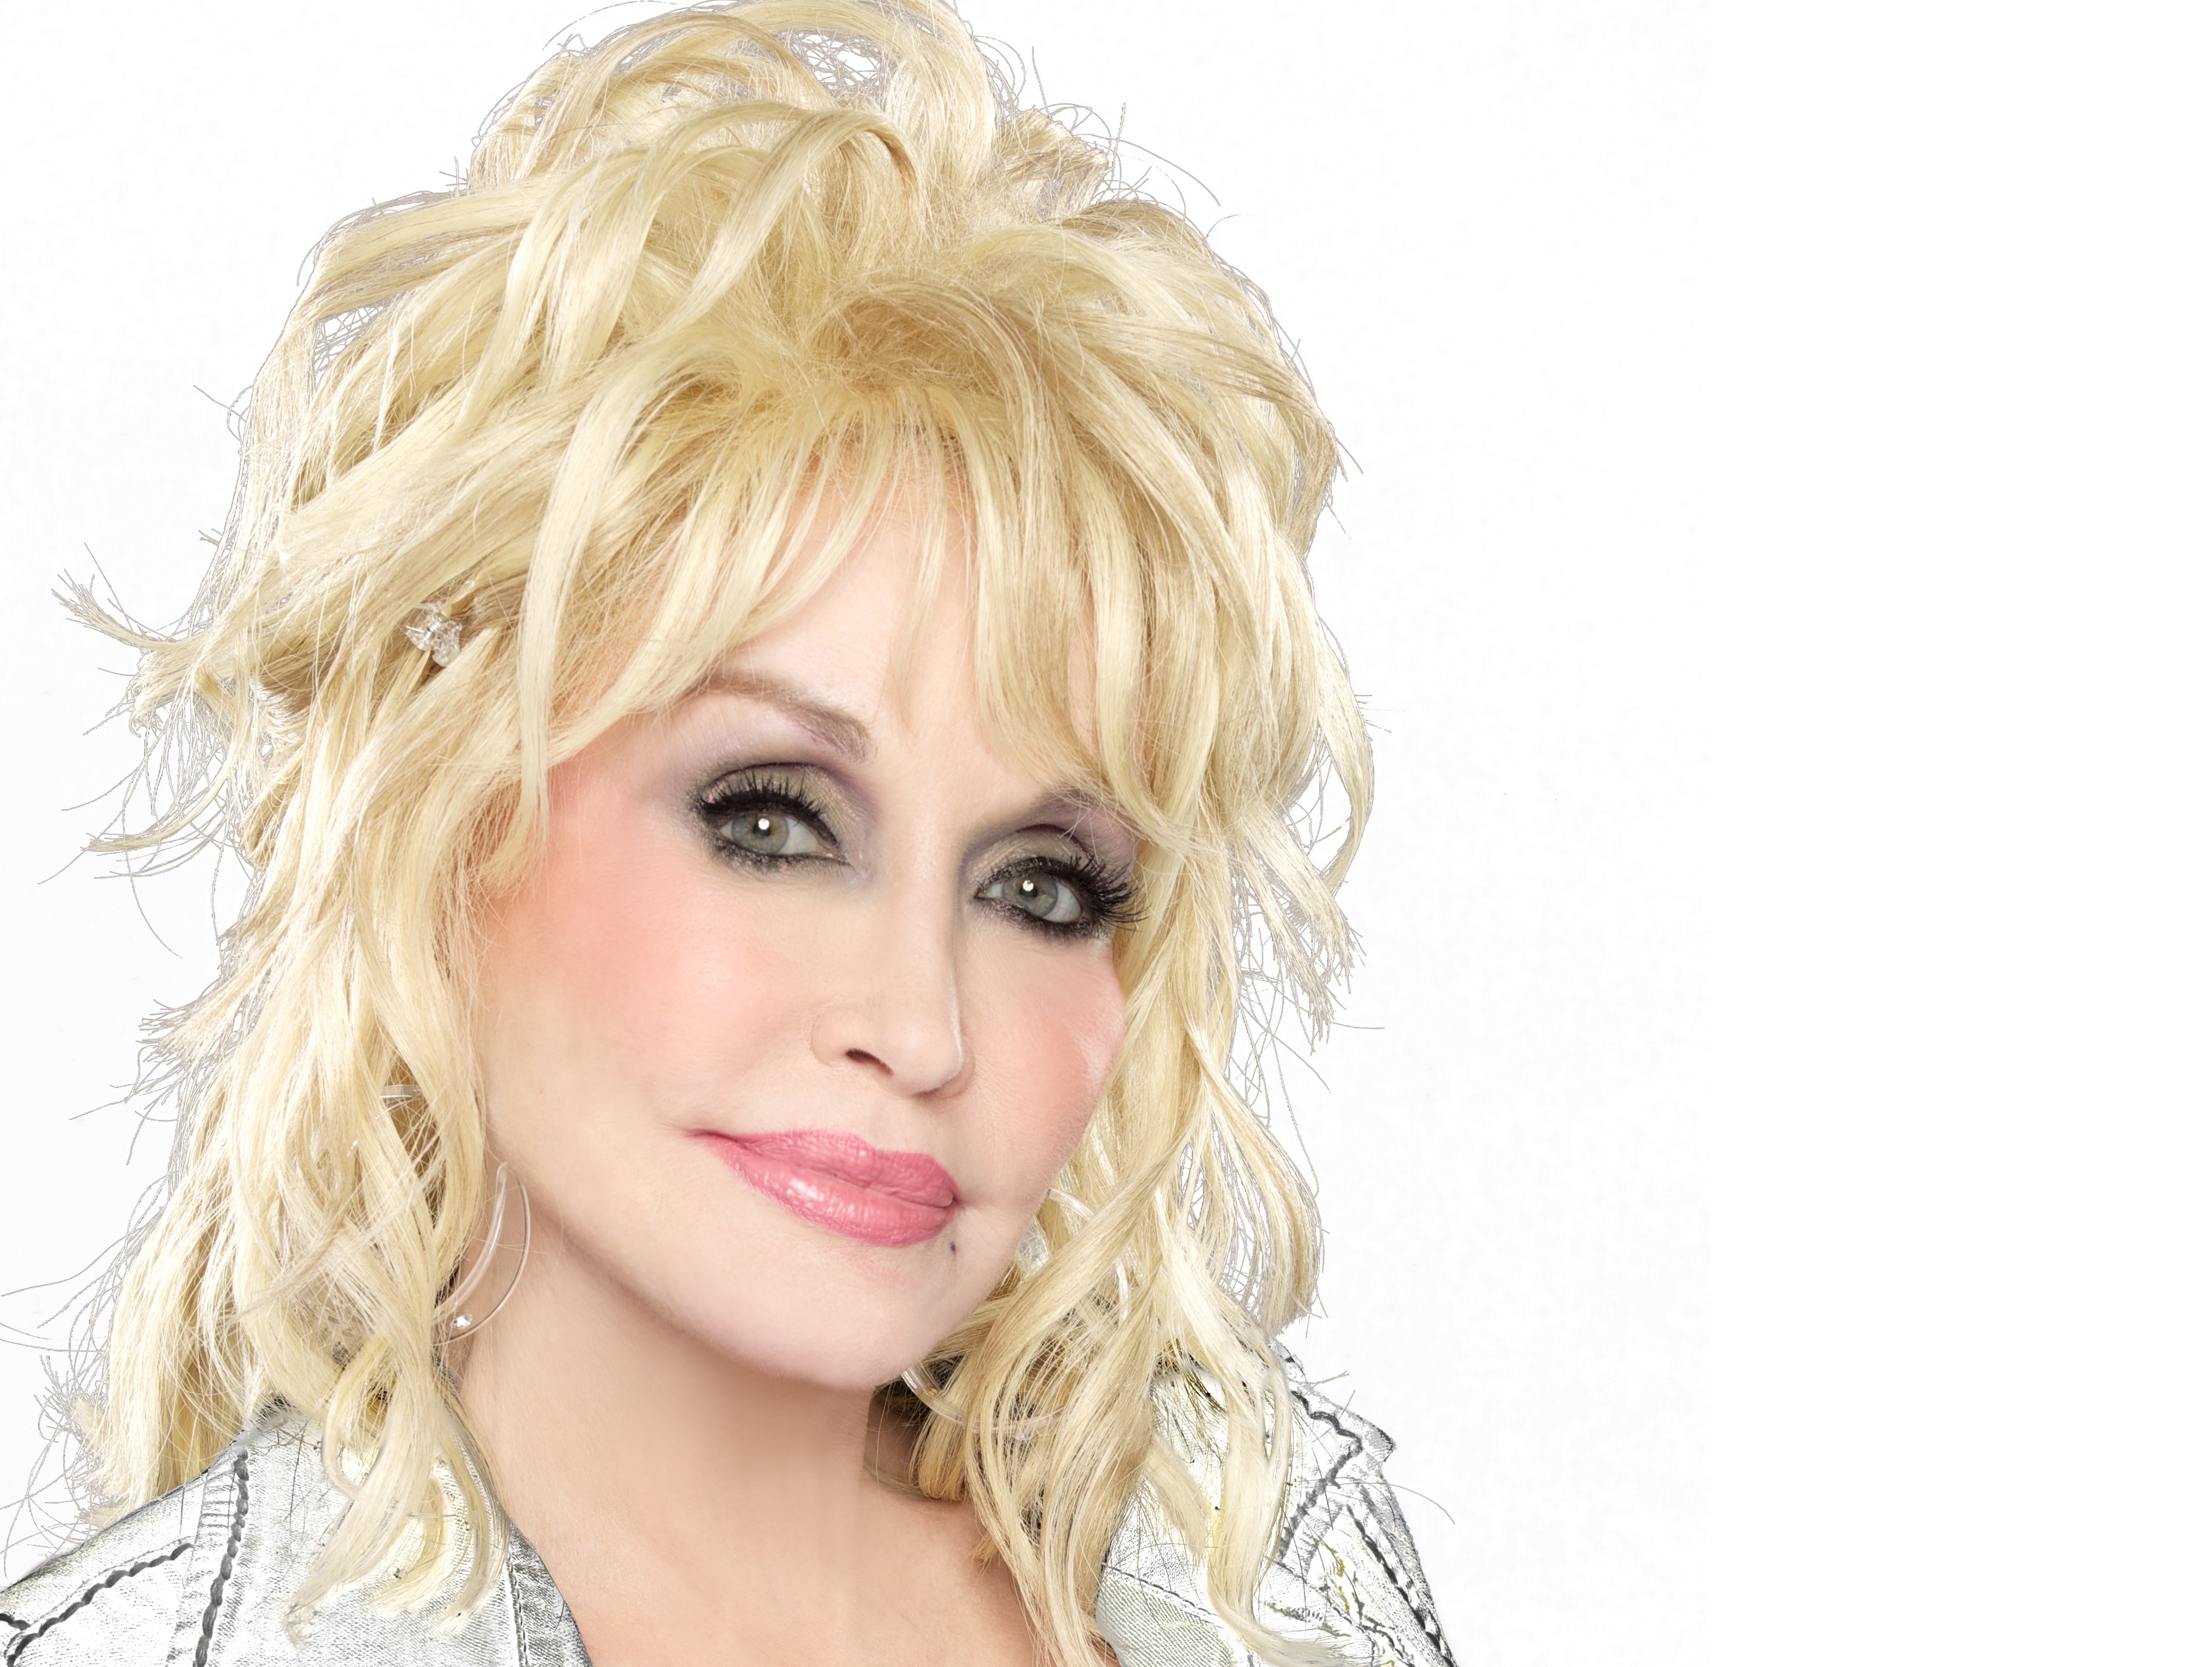 Dolly Parton Says Her Ments About Hillary Clinton Were